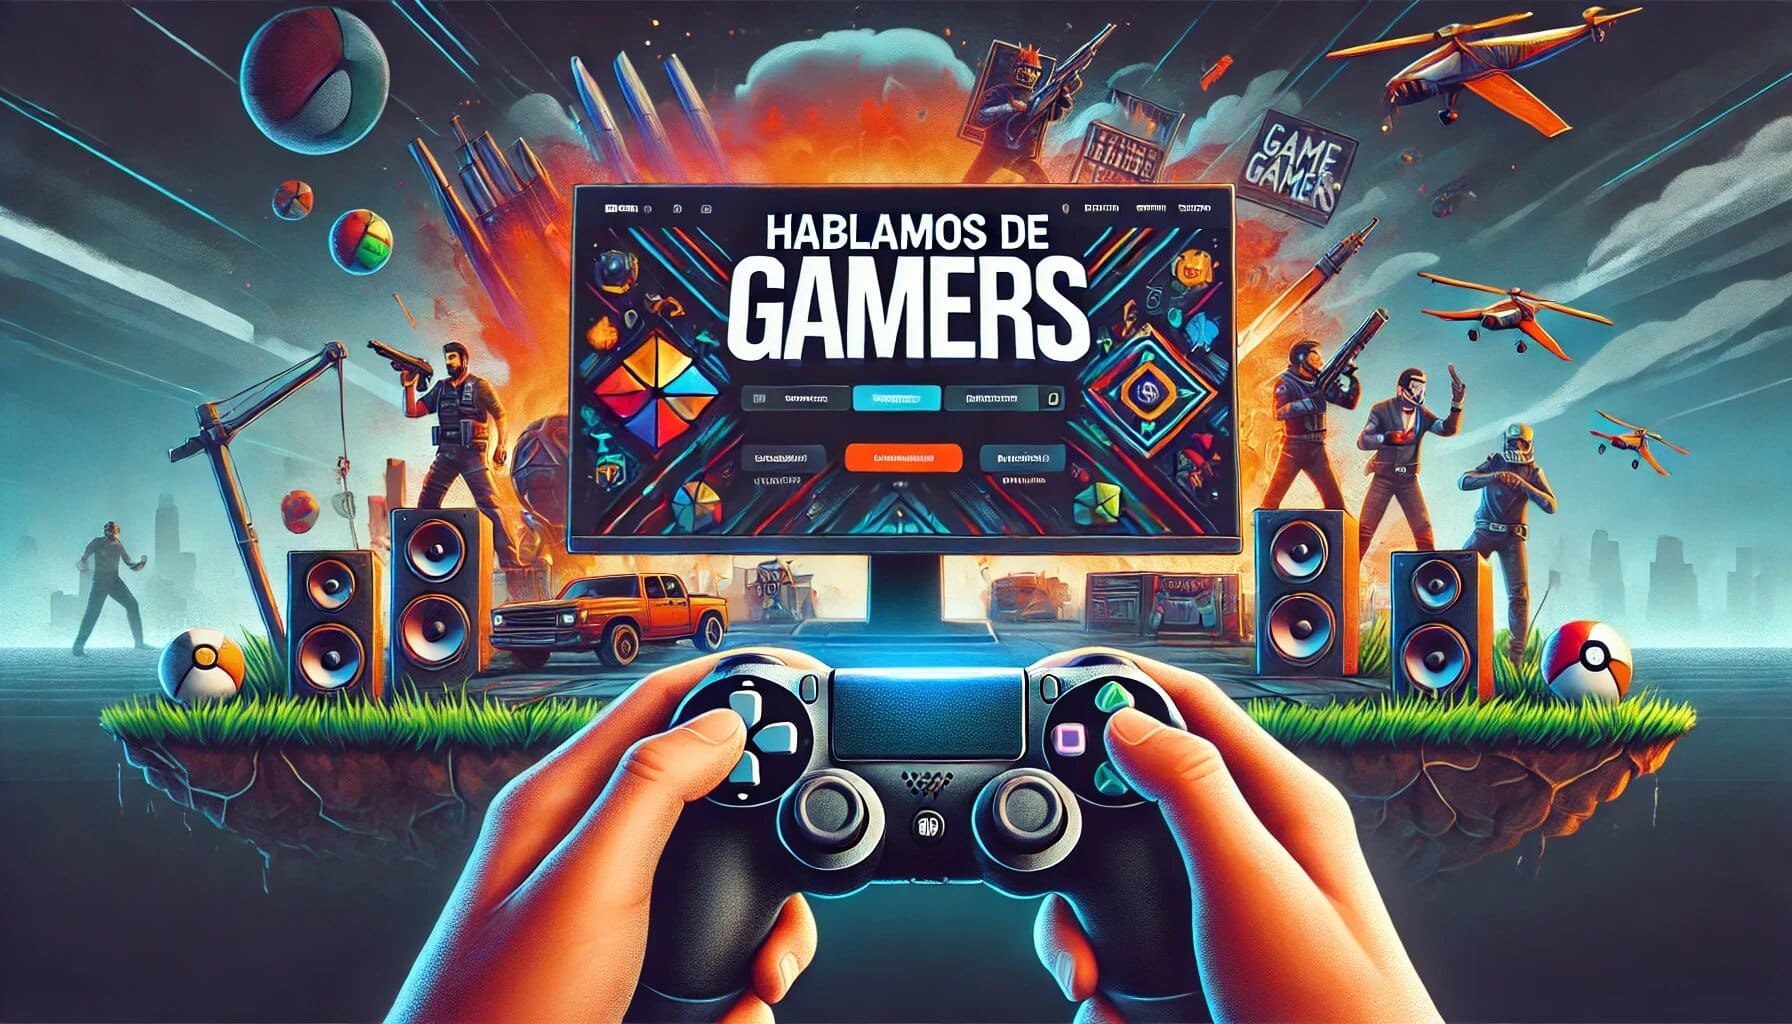 A vibrant and engaging image depicting the gaming platform HDG (HablamosDeGamers). The image features a player holding a gaming controller, a large screen displaying the HDG website, and various gaming elements such as characters, drones, and gaming gear in the background, emphasizing the dynamic and immersive gaming community of HDG.